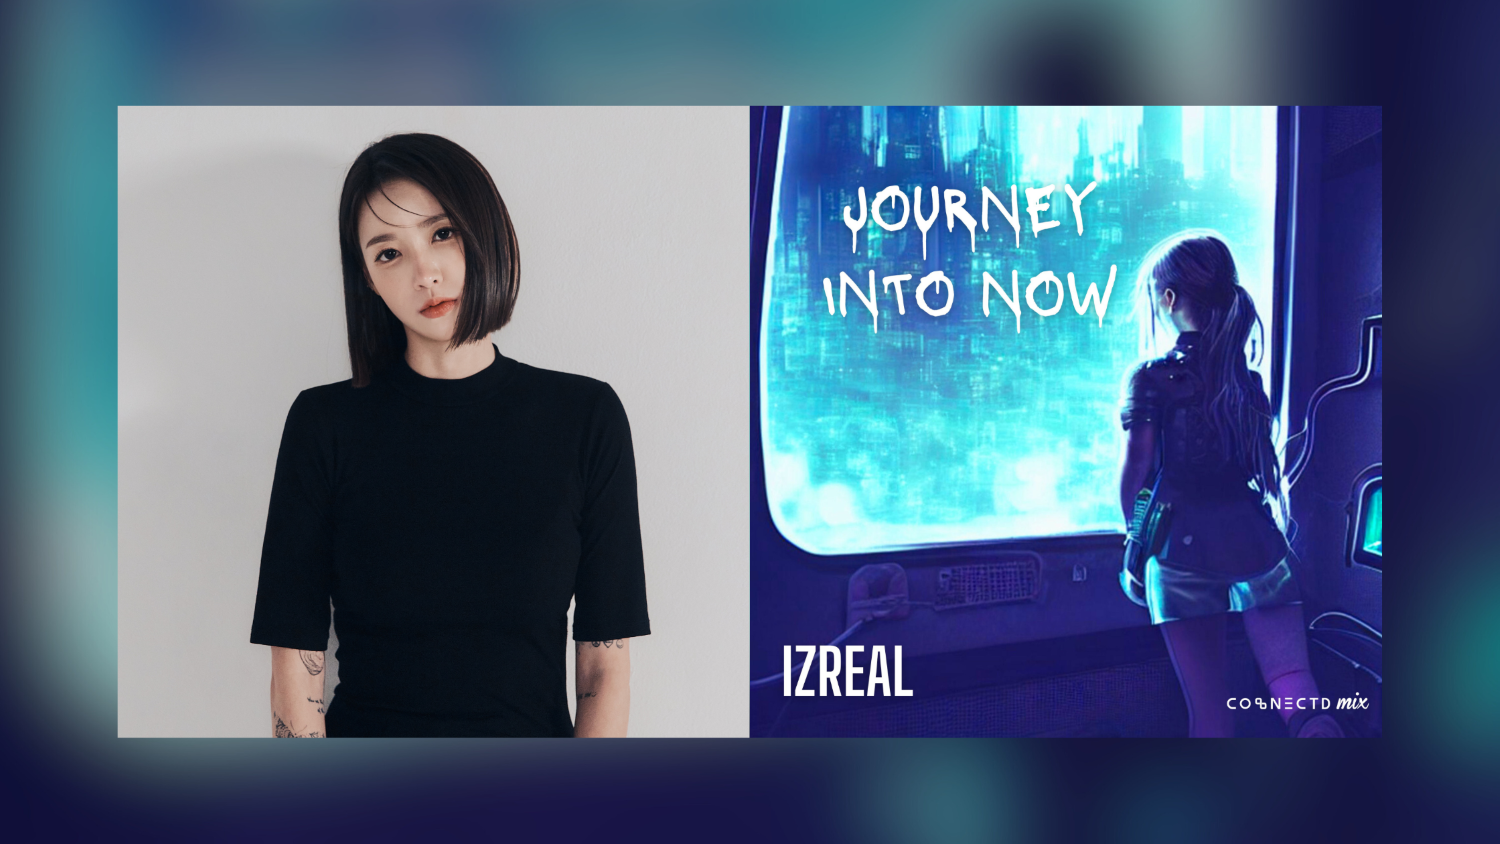 Stream “Journey Into Now” by DJ IZREAL – new techno song from a rising Korean DJ